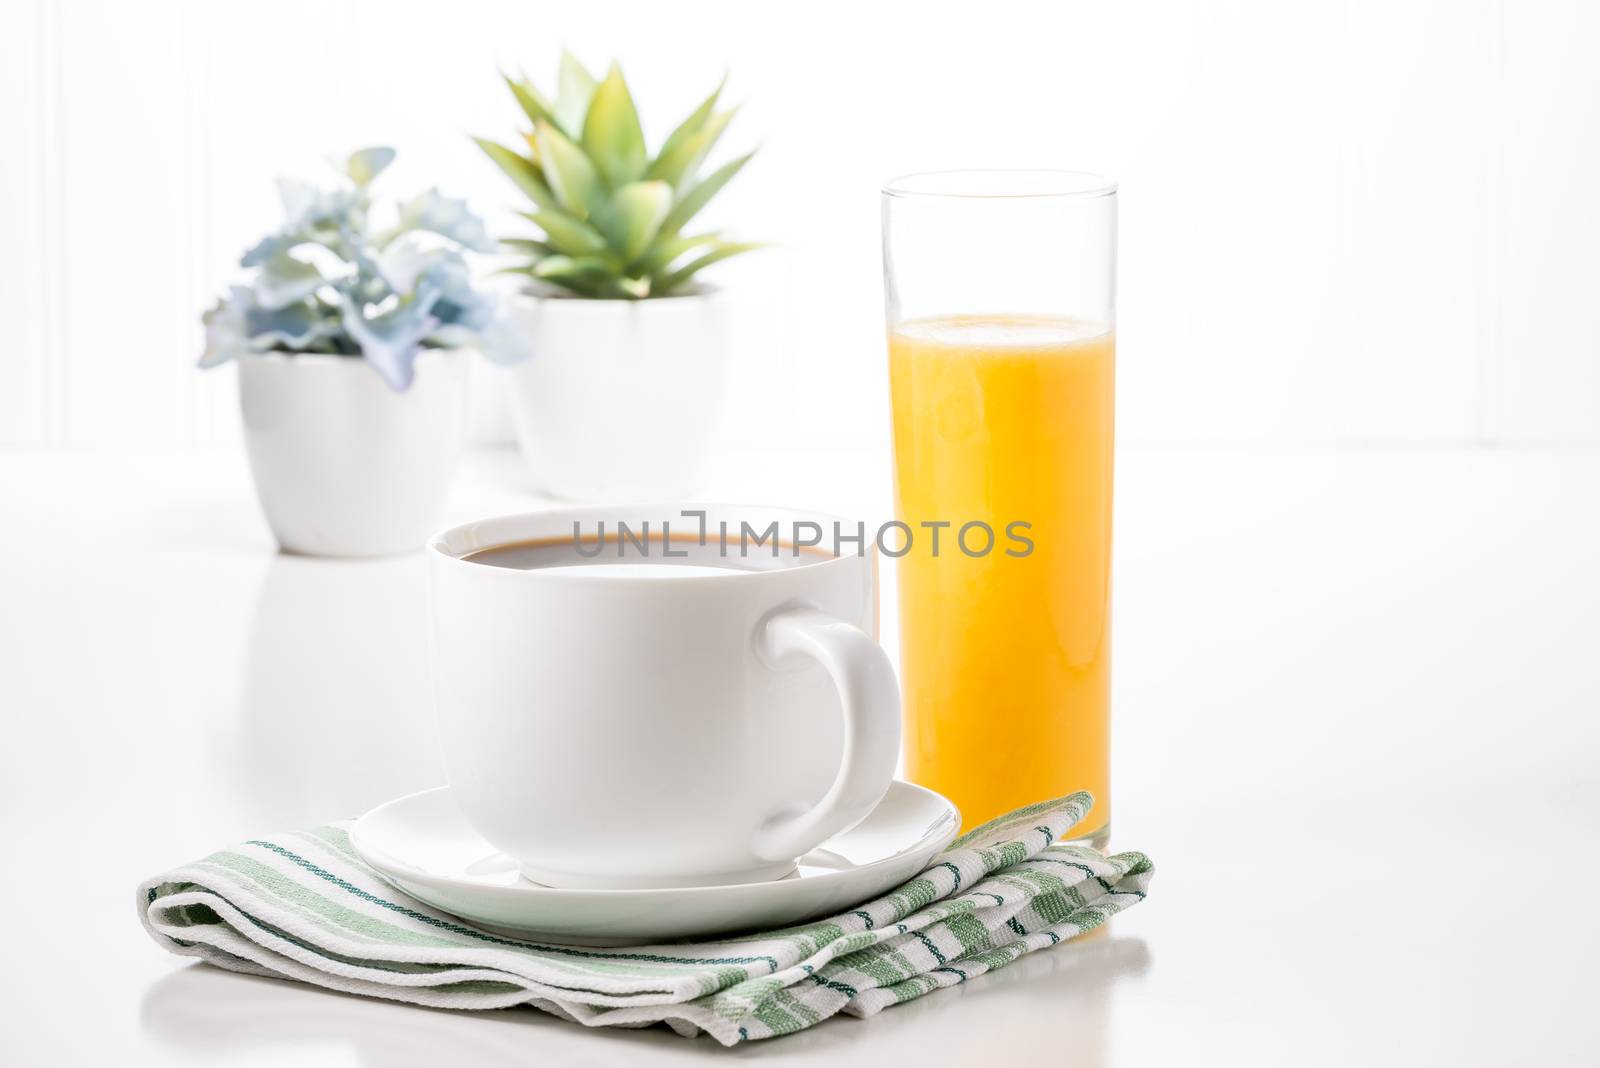 Cup of hot coffee and glass of orange juice with potted plants in background.